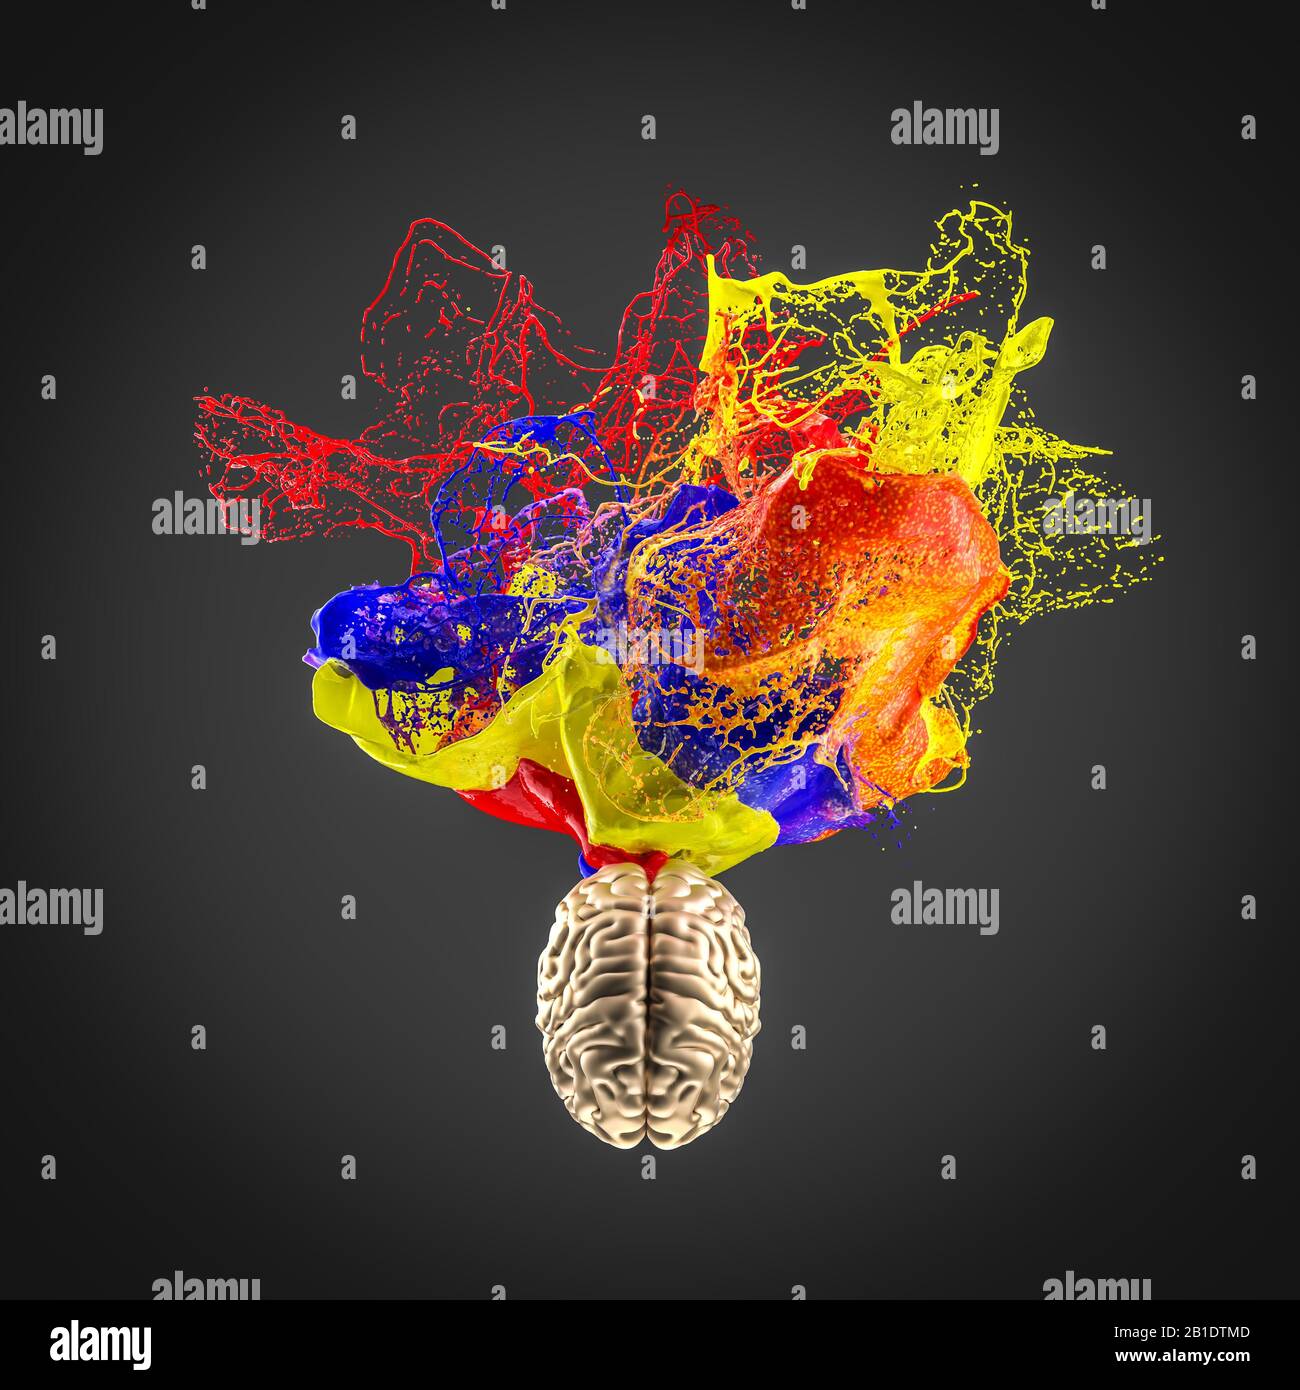 3d image of a gold colored human brain and an explosion of color. concept of creativity and artistic sense. Nobody around. Stock Photo